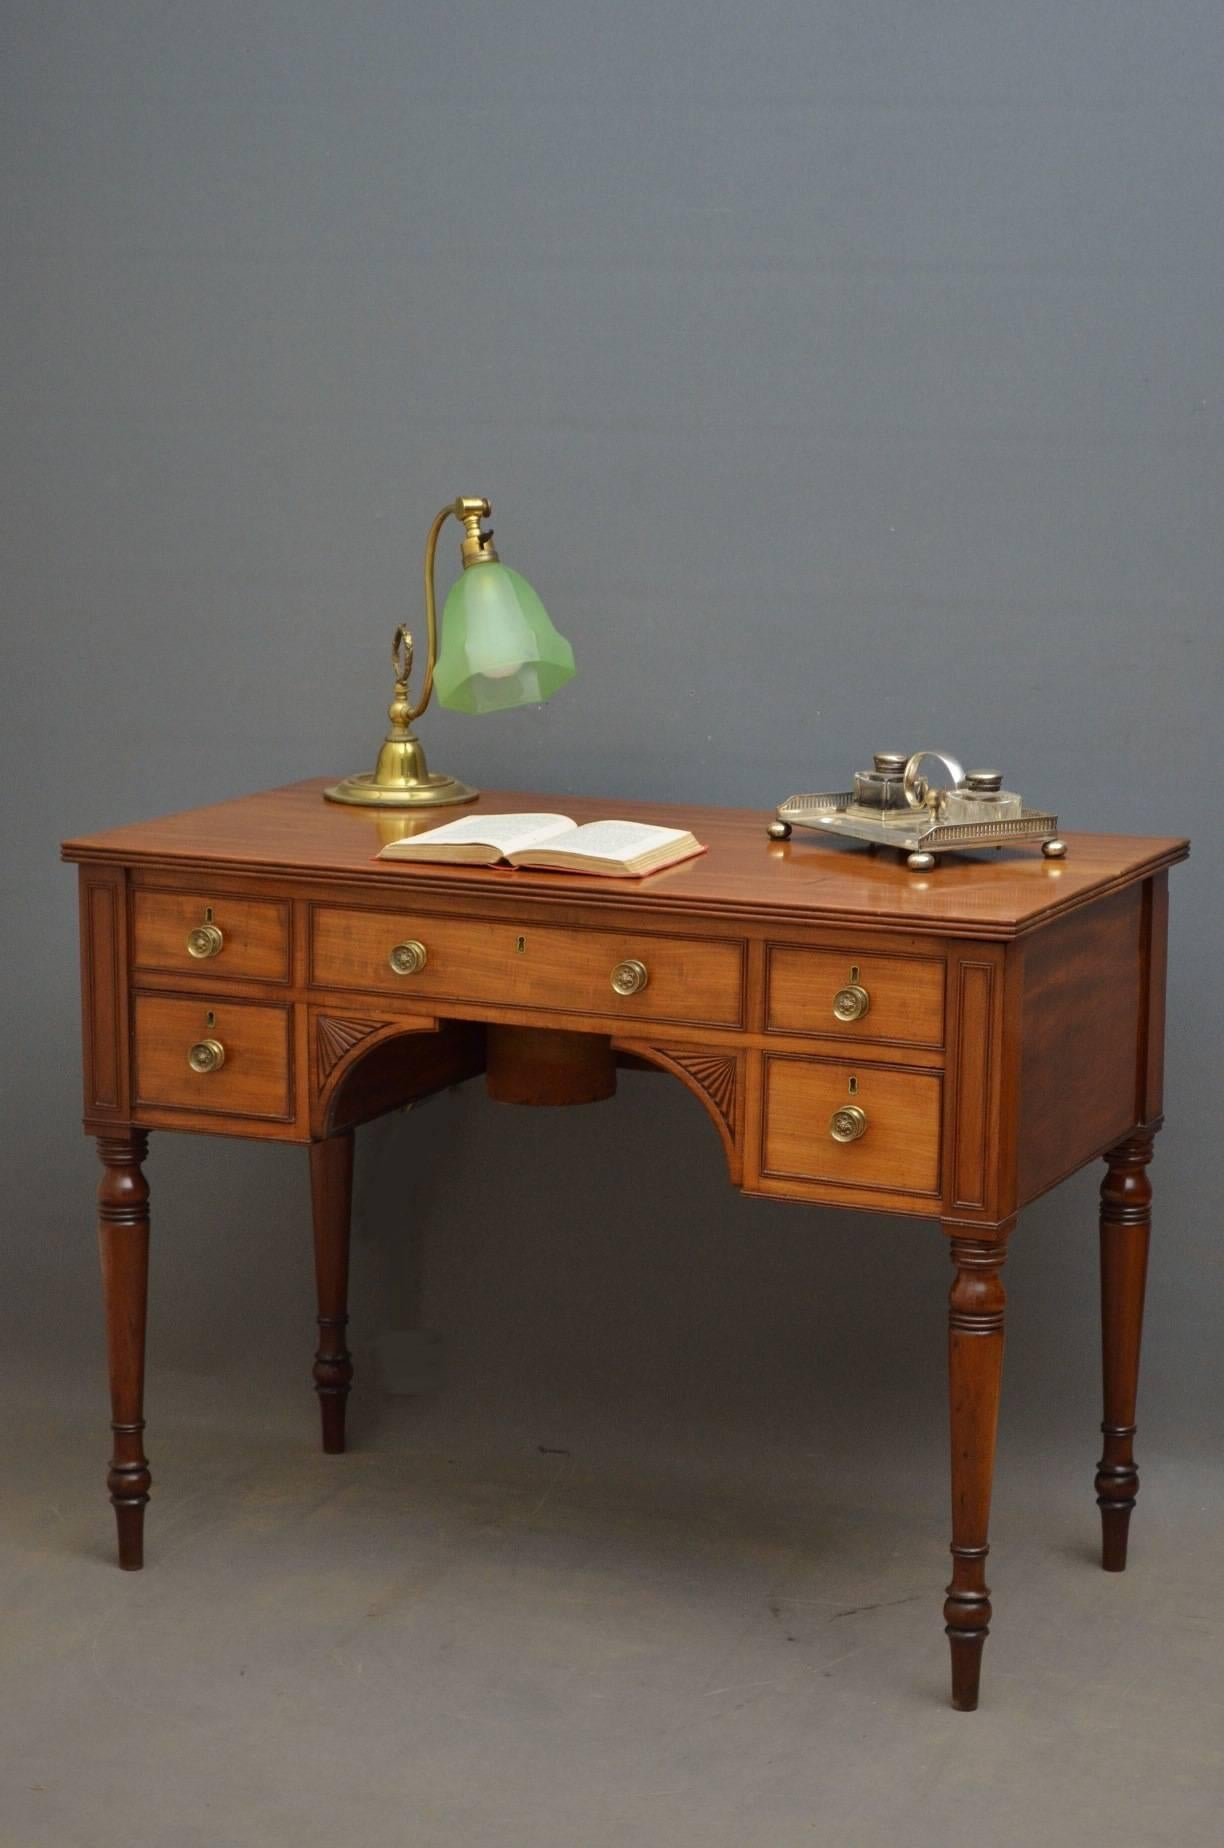 A fine quality Regency mahogany wash stand or dressing table, having solid mahogany figured top with reeded edge which opens to reveal original fitted interior with small compartments above three dummy frieze drawers and two oak lined short drawers